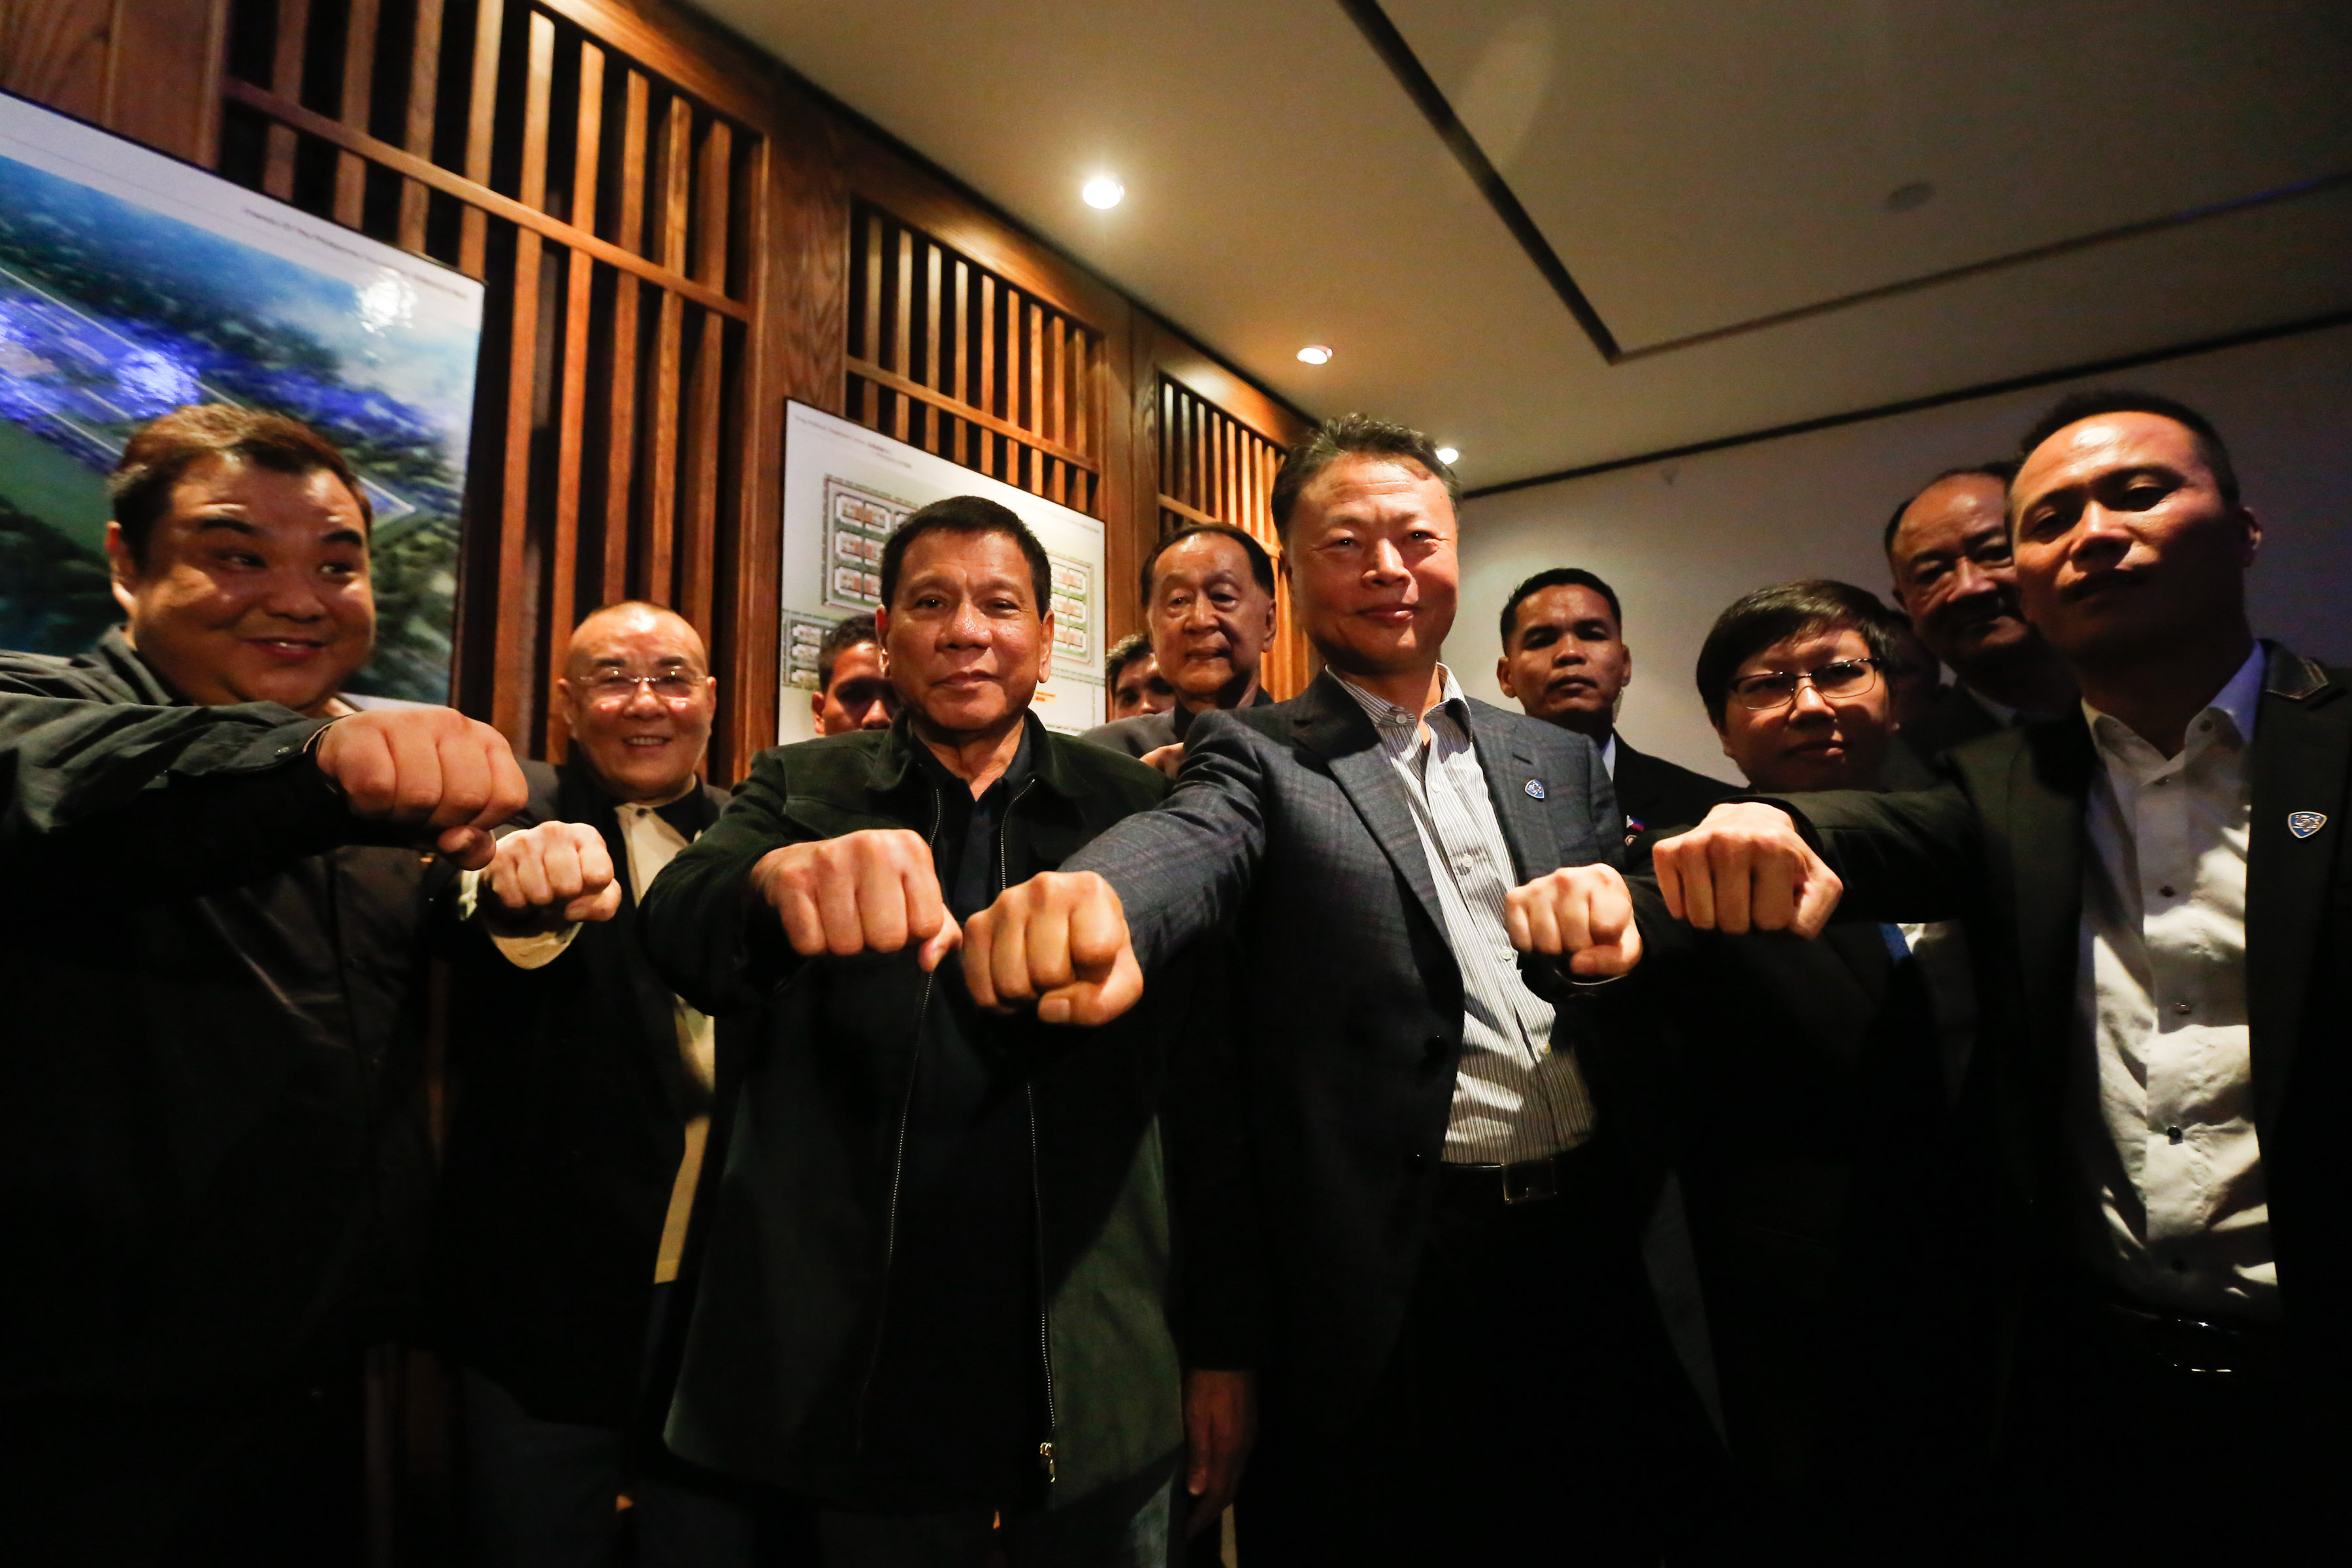 CHOW TIME. President Rodrigo Duterte, along with Chinese Ambassador to the Philippines Zhao Jianhua and officials of the Friends of the Philippines Foundation, pose for a group photo at Dadong Roast Duck Restaurant in Beijing on October 19, 2016. Photo by Toto Lozano/Presidential Photo  